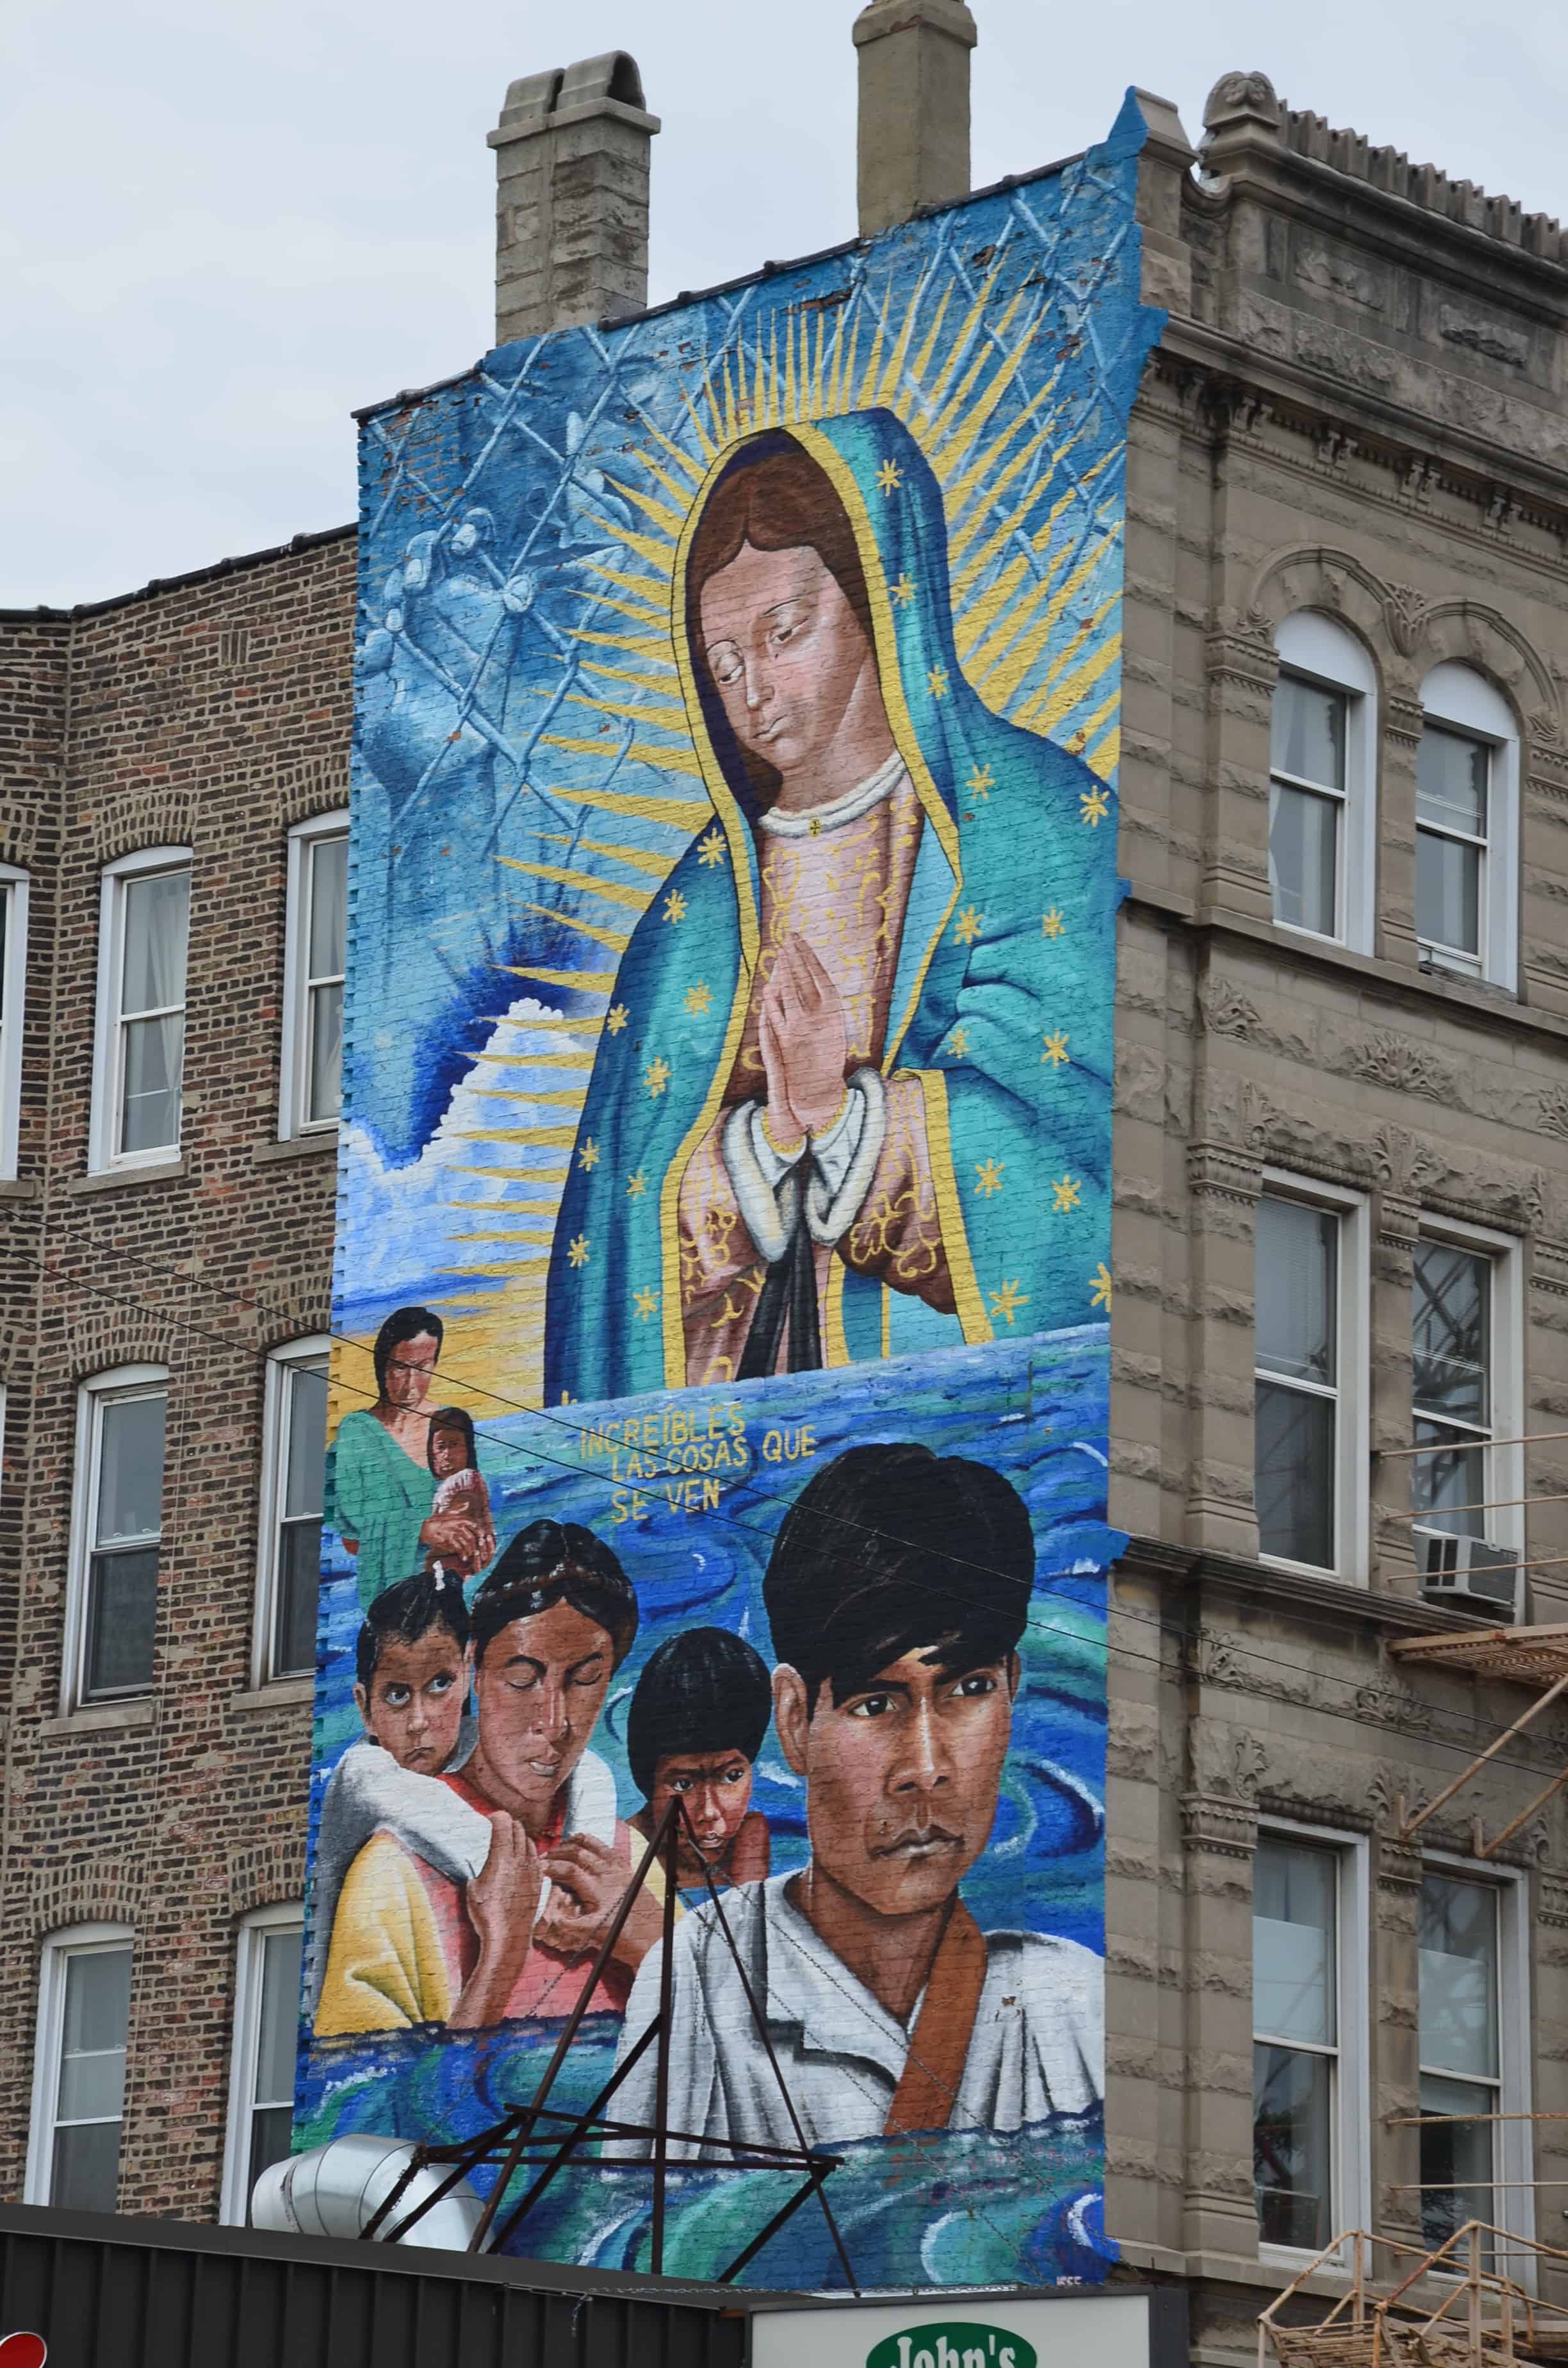 19th and Ashland in Pilsen, Chicago, Illinois